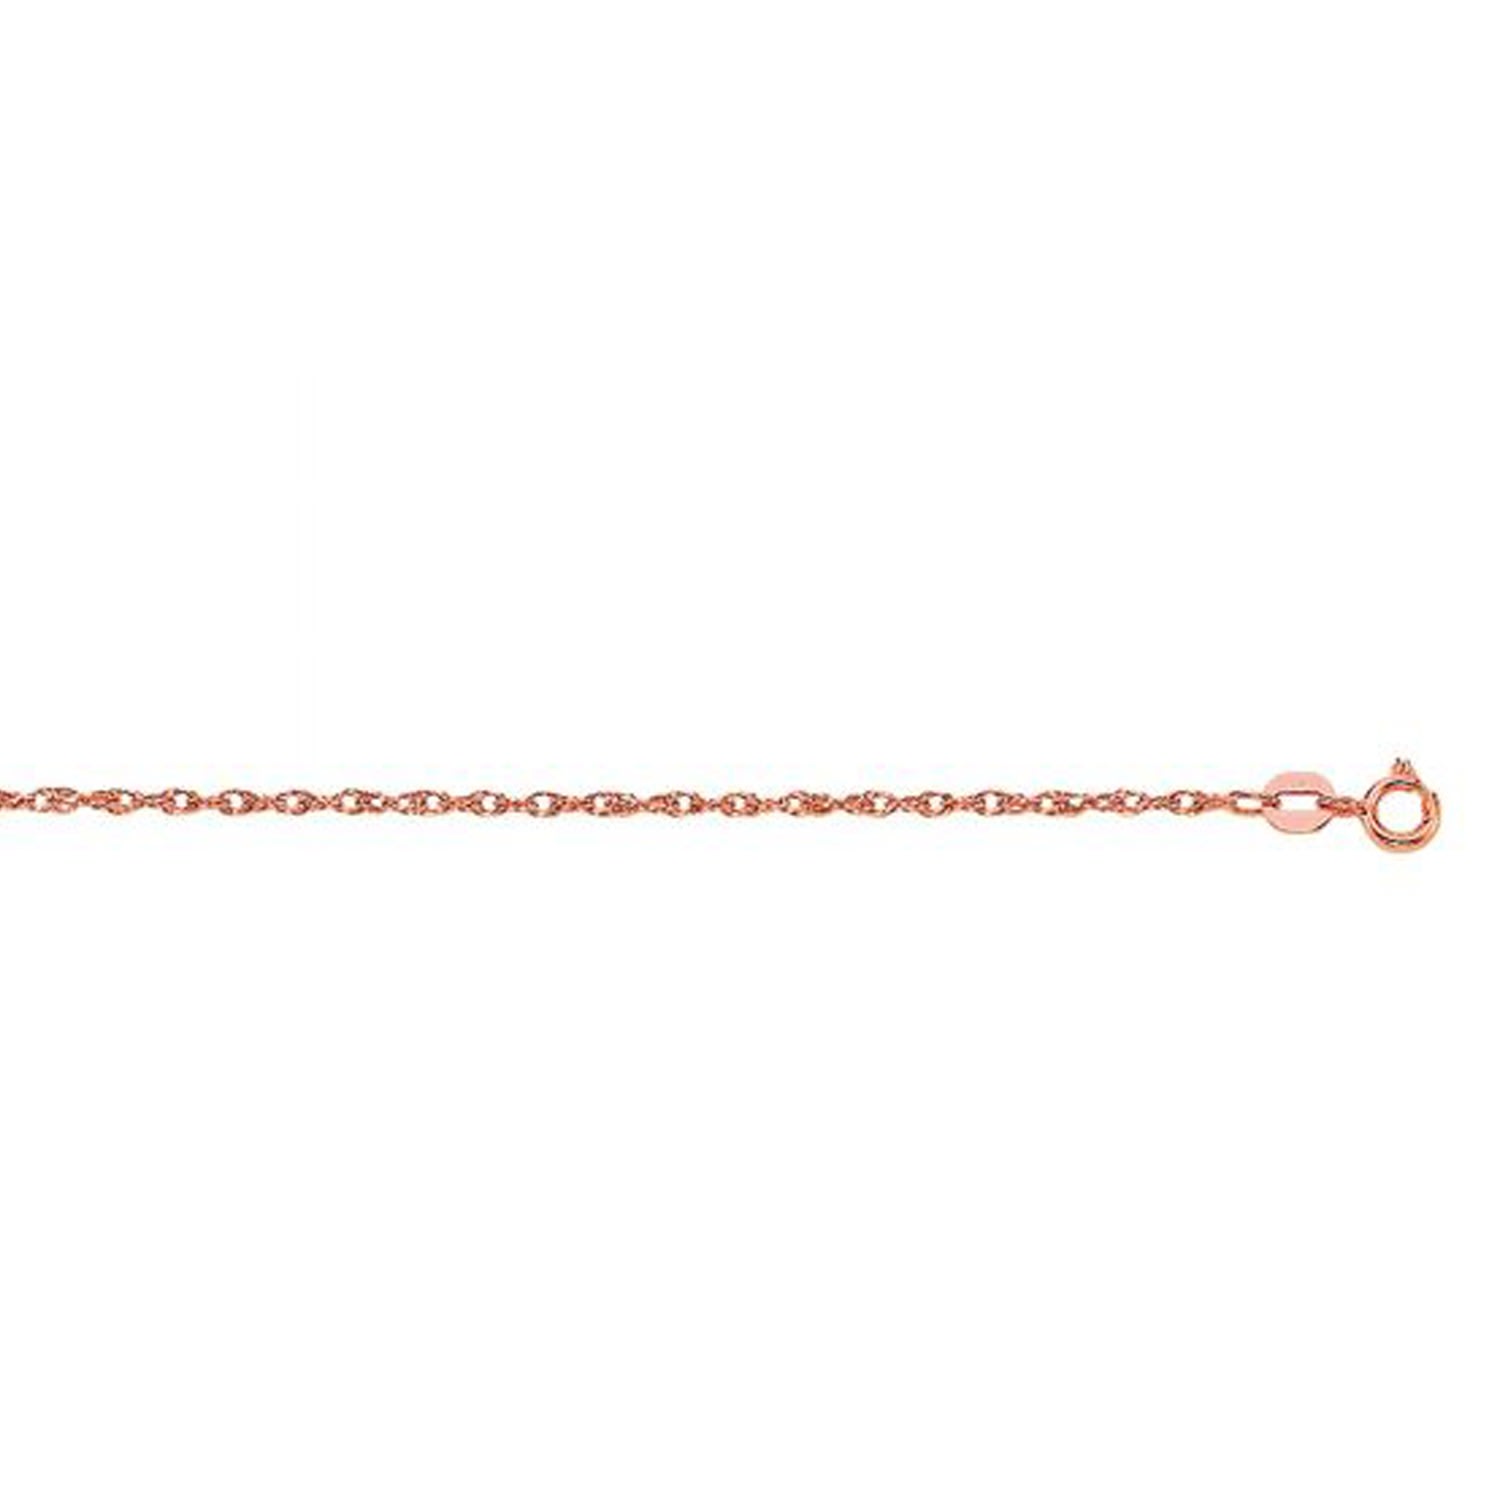 Men's 14K Rose Gold Diamond Cut Carded Rope Chain Necklace Choker Undefined Jewelry